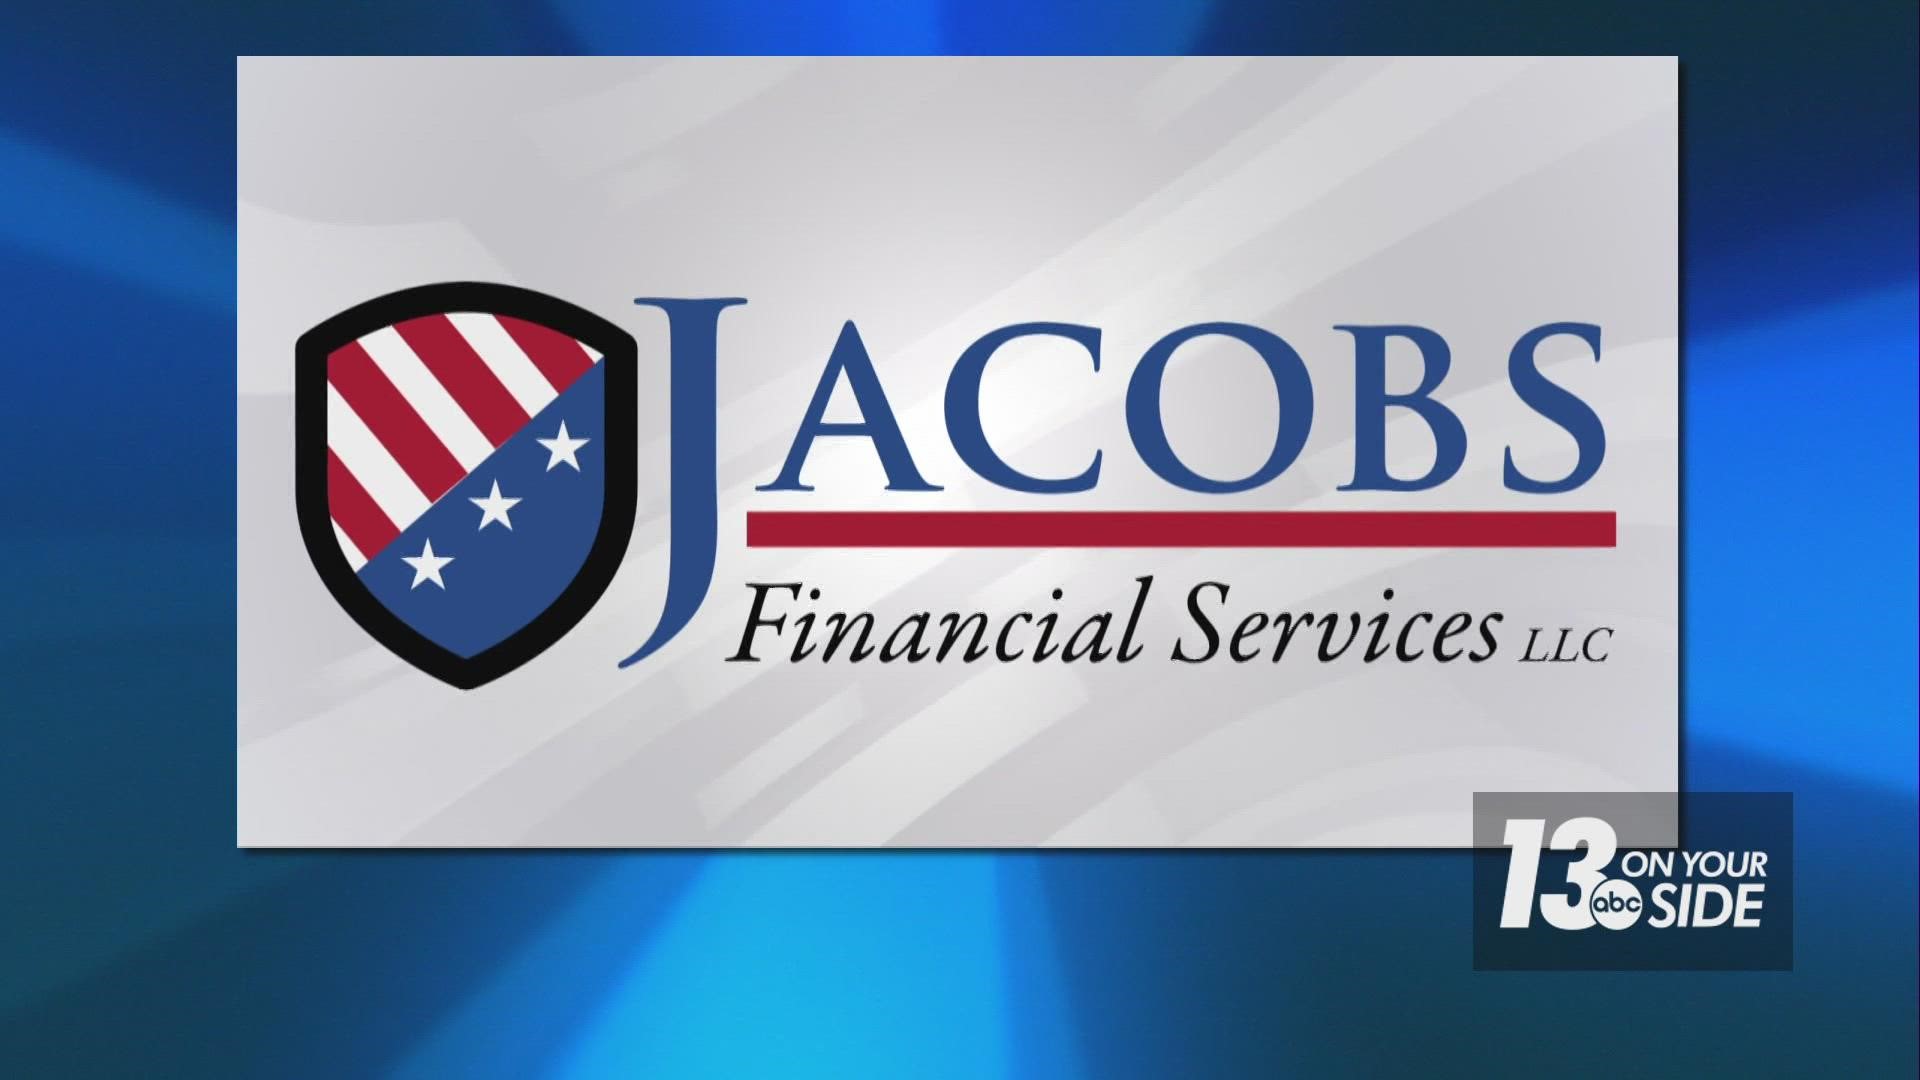 Tom Jacobs from Jacobs Financial Services can help you plot your course.